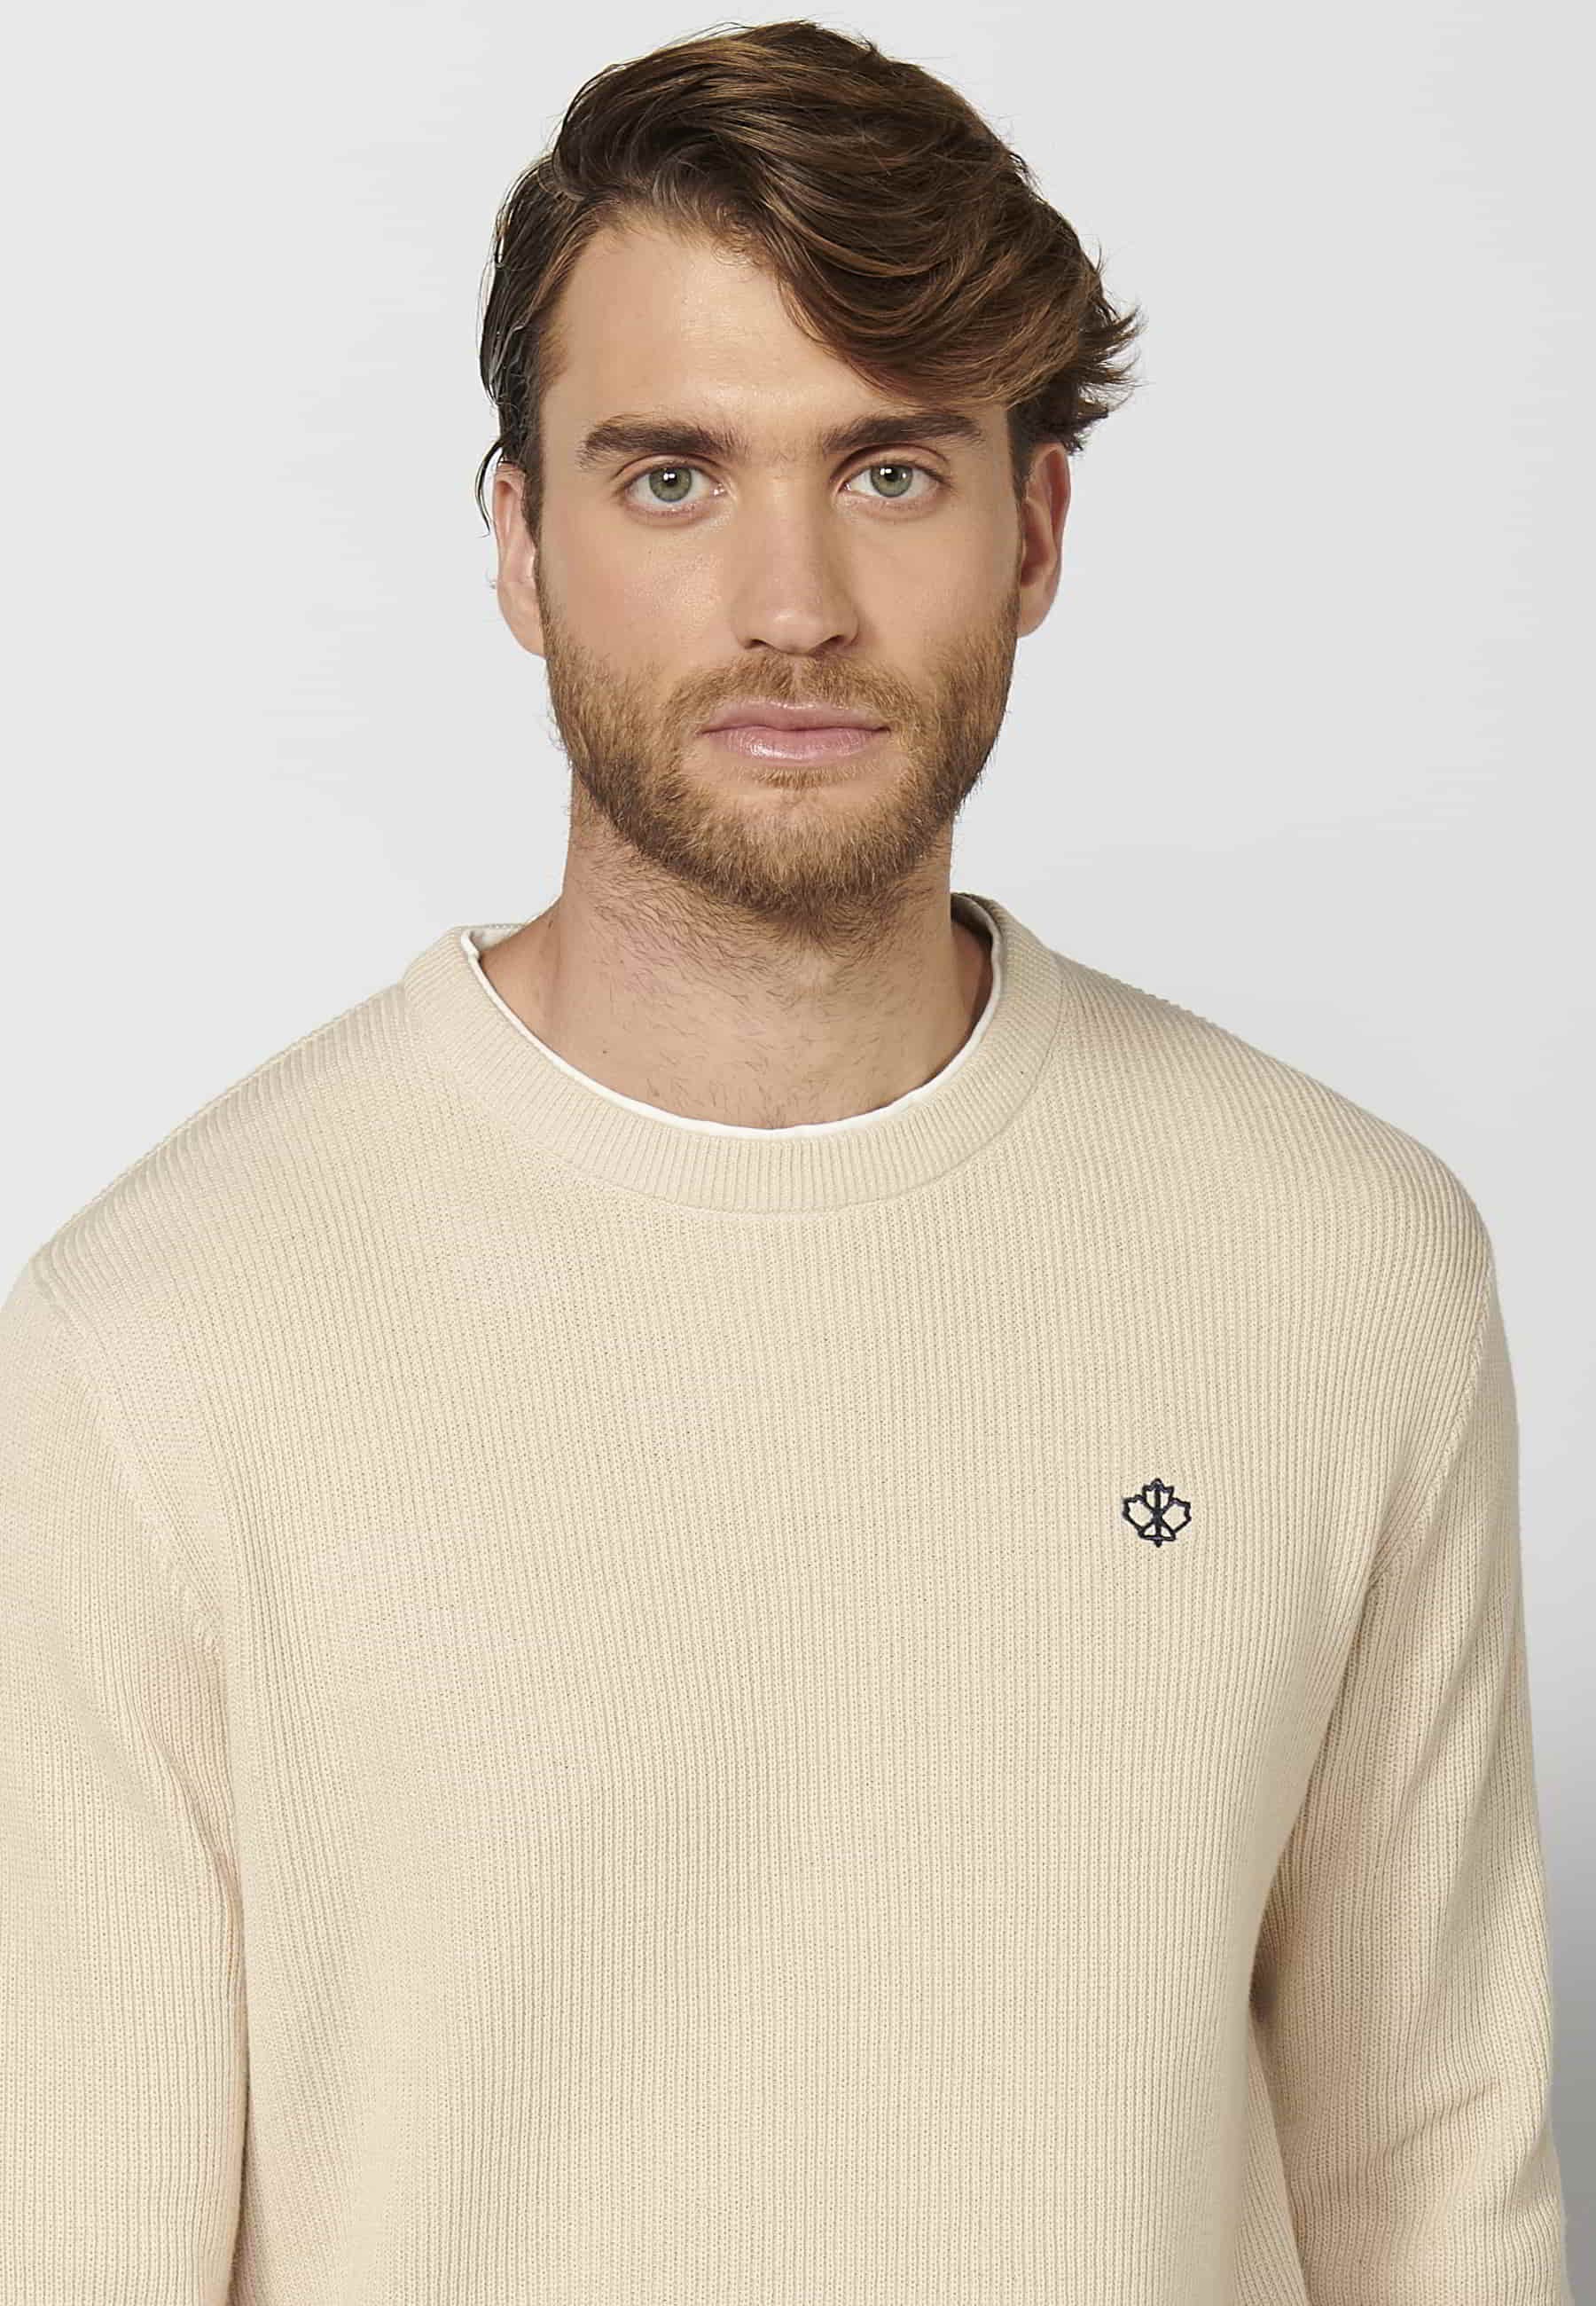 Long-sleeved cotton tricot sweater with embroidered detail in Cream color for Men 5